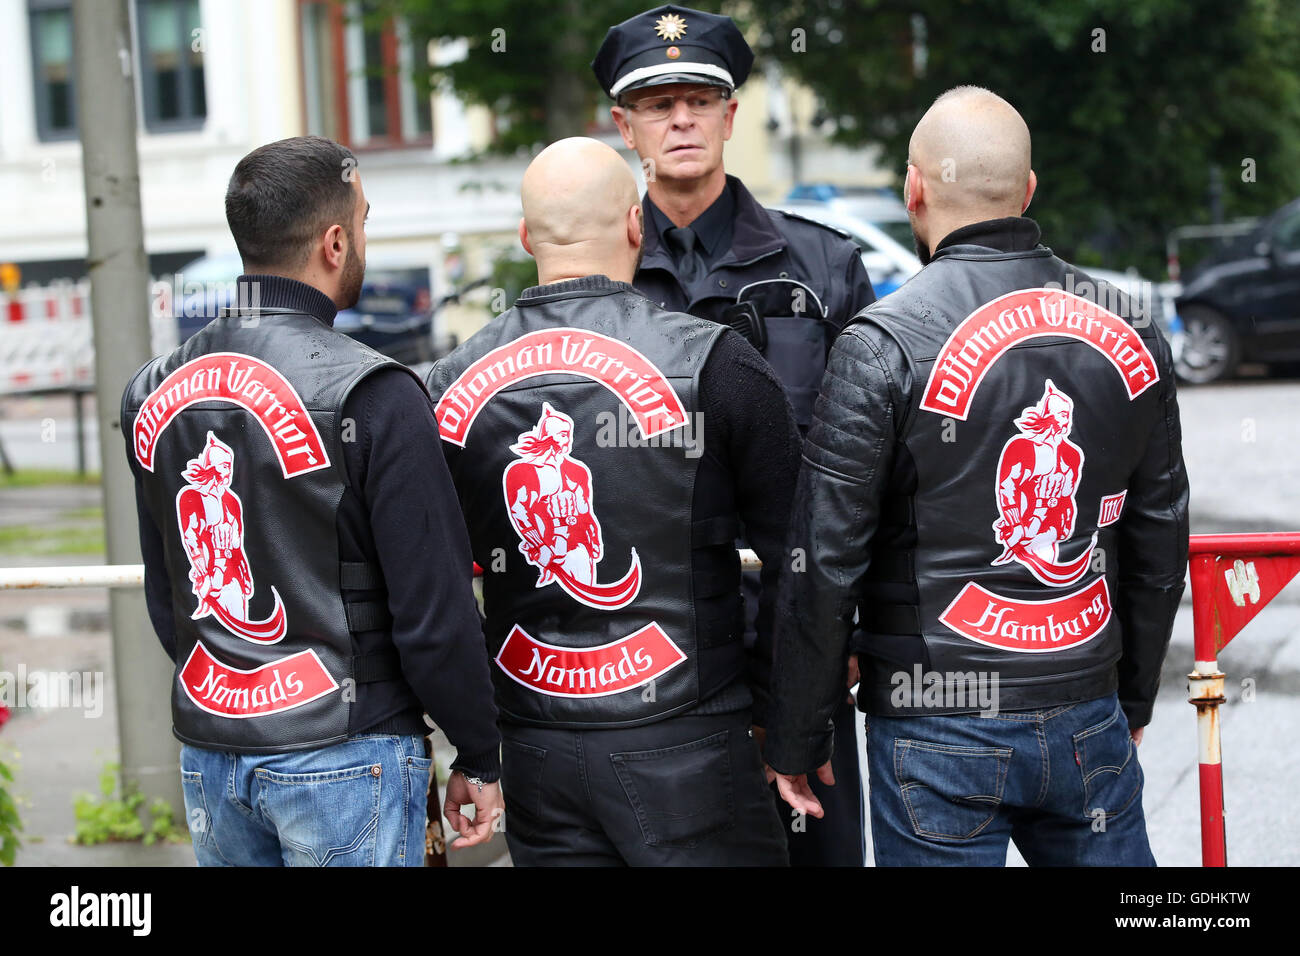 Hamburg, Germany. 16th July, 2016. People wearing jackets with the ...